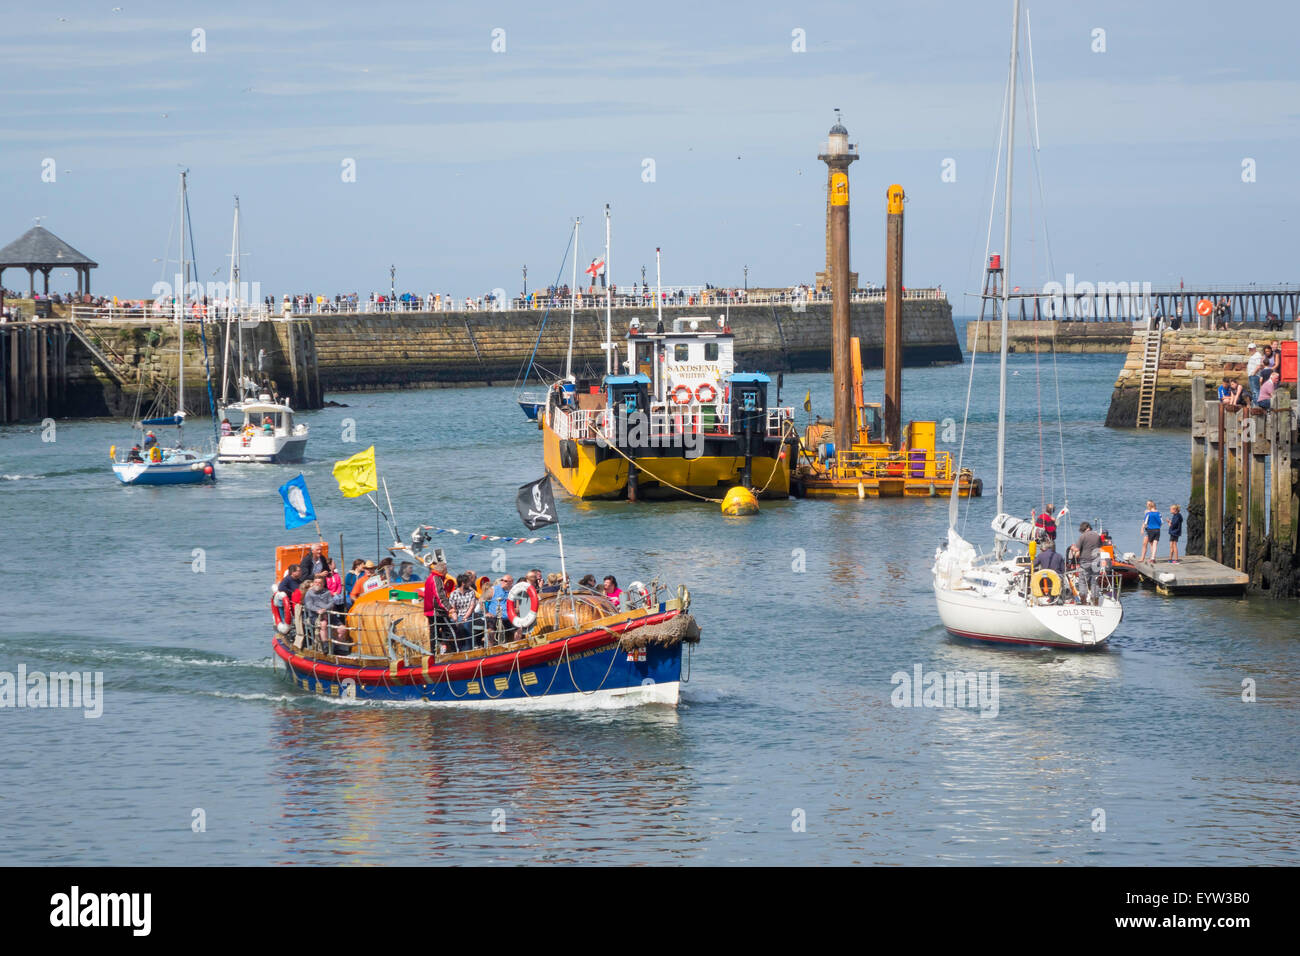 Crowded Whitby harbour with the  Lifeboat 'Mary Ann Hepworth' inbound passing  the dredger “Sandsed” and several sailing craft. Stock Photo